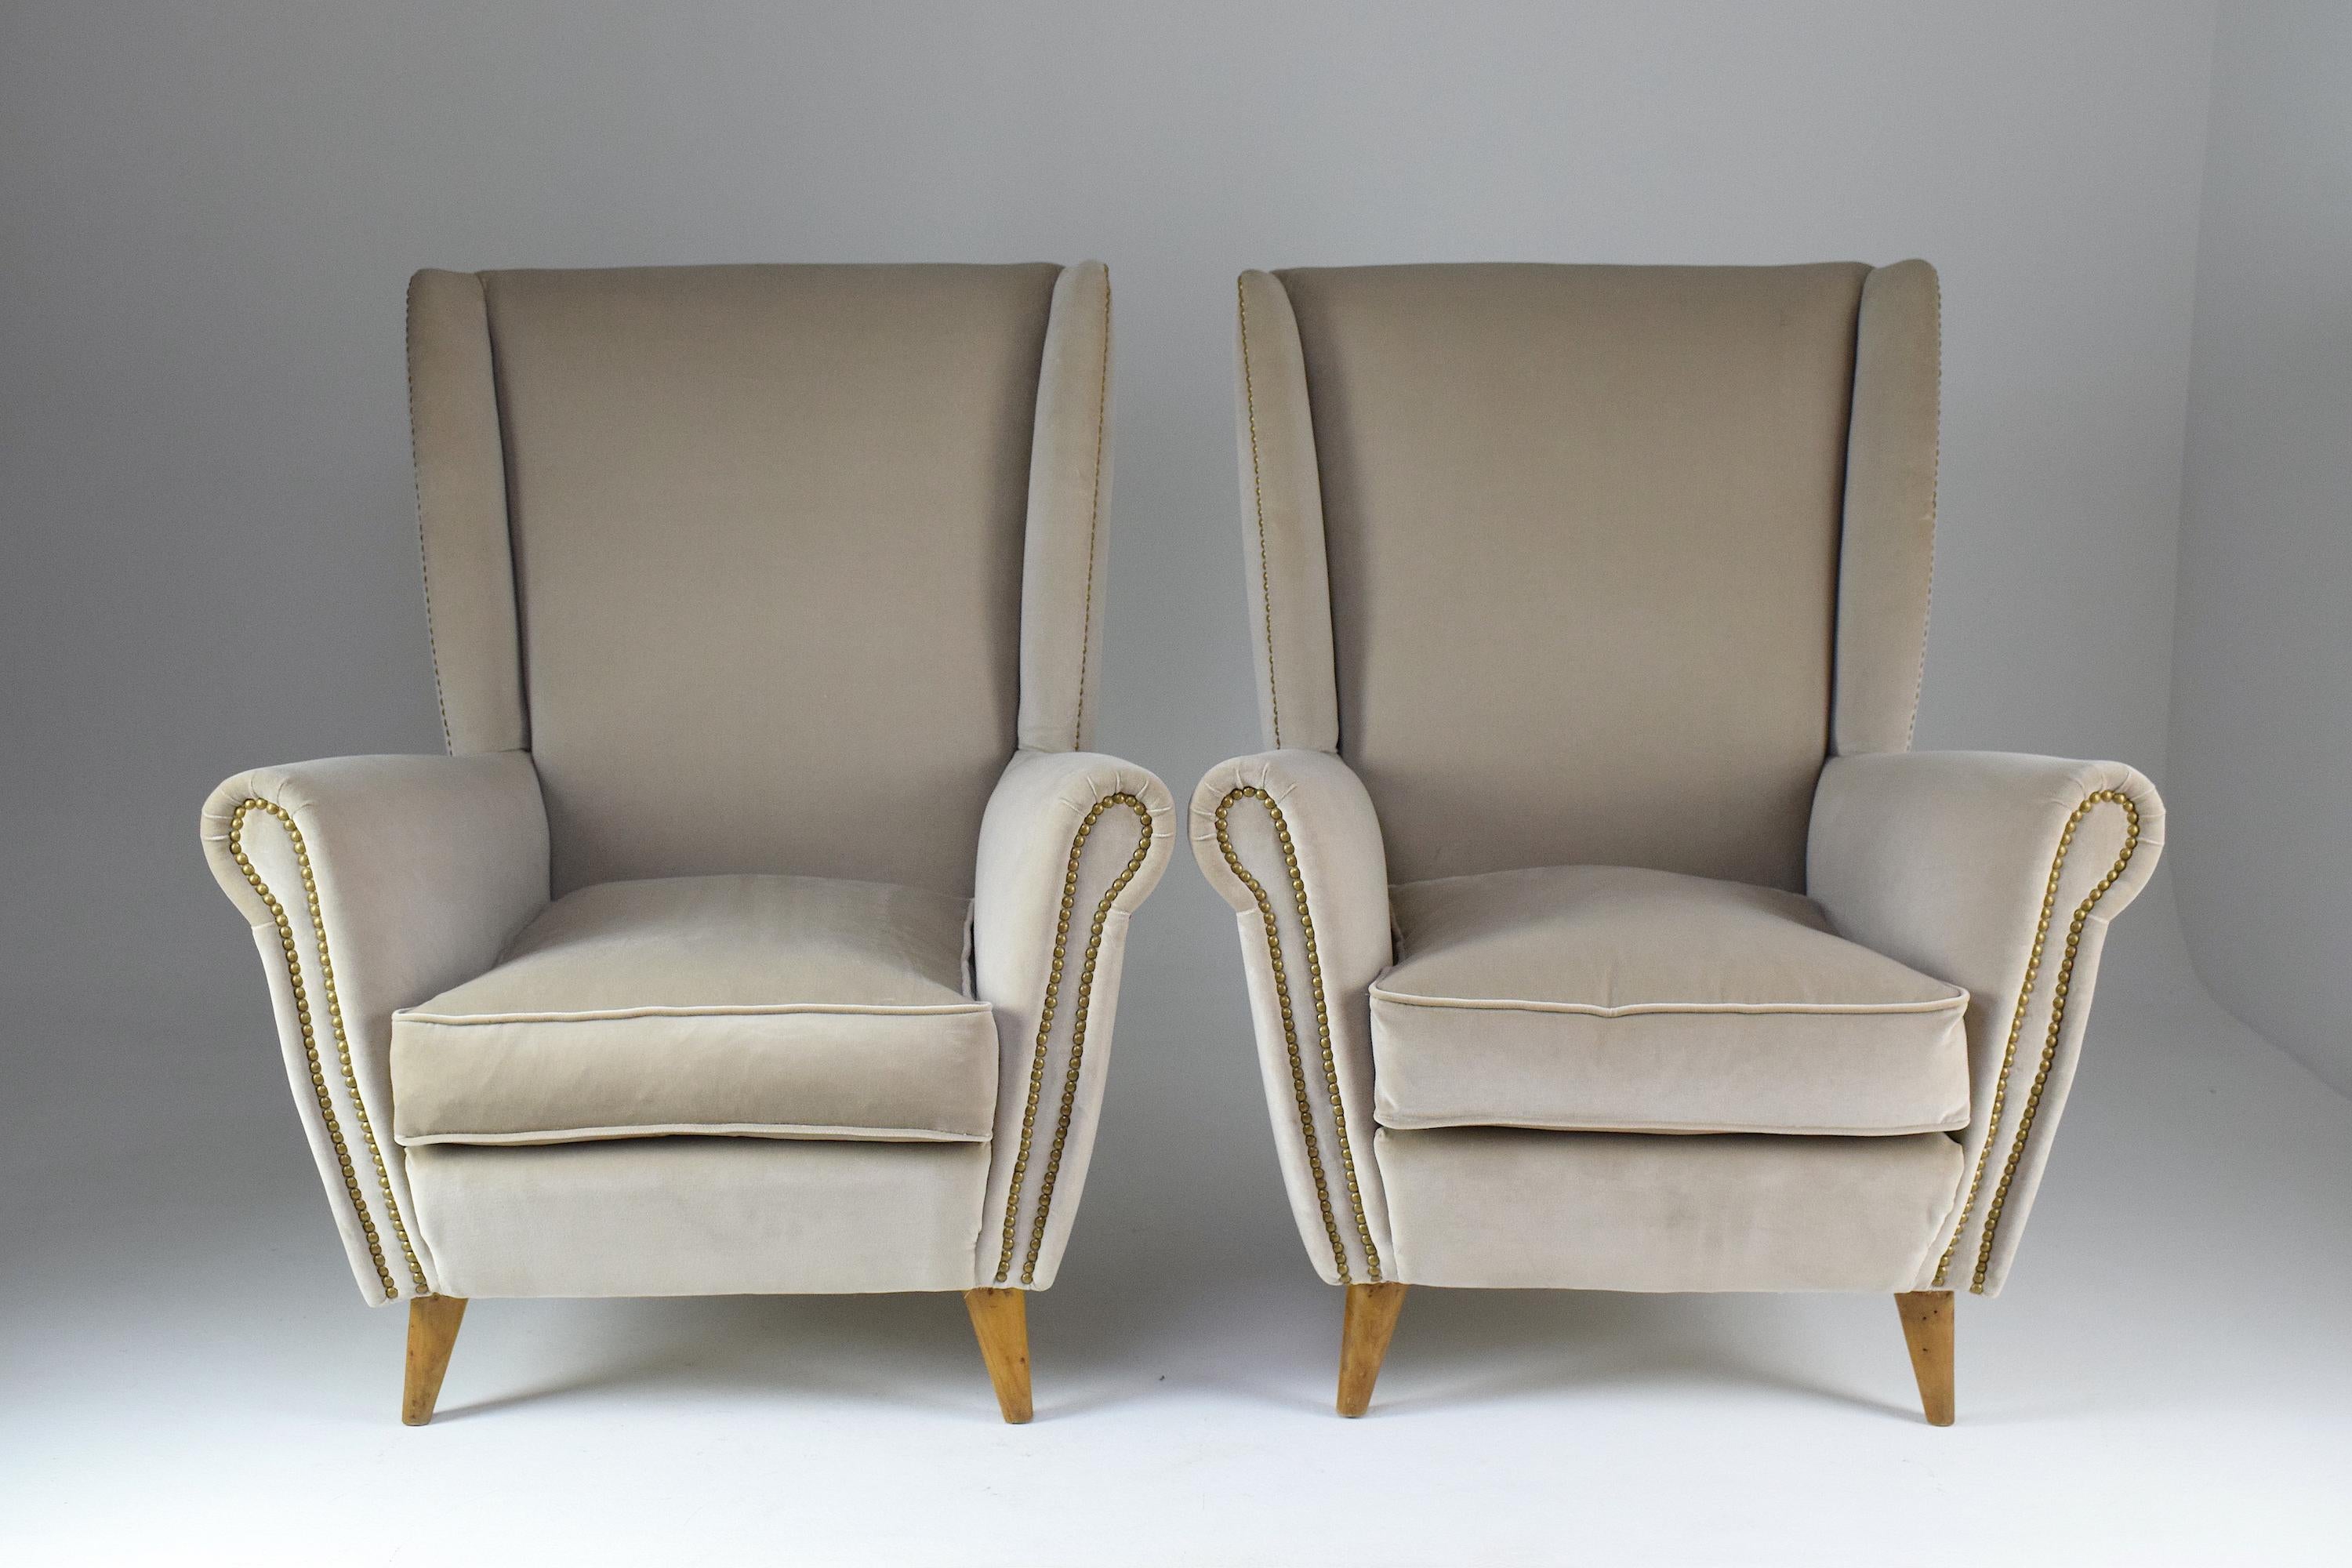 Set of two Italian design classic armchairs or lounge chairs by iconic designer Gio Ponti from the 1940s. In fully restored condition, with new padding, beige/ light brown velvet upholstery, and nailhead trim.

-----

We are an exhibition space and